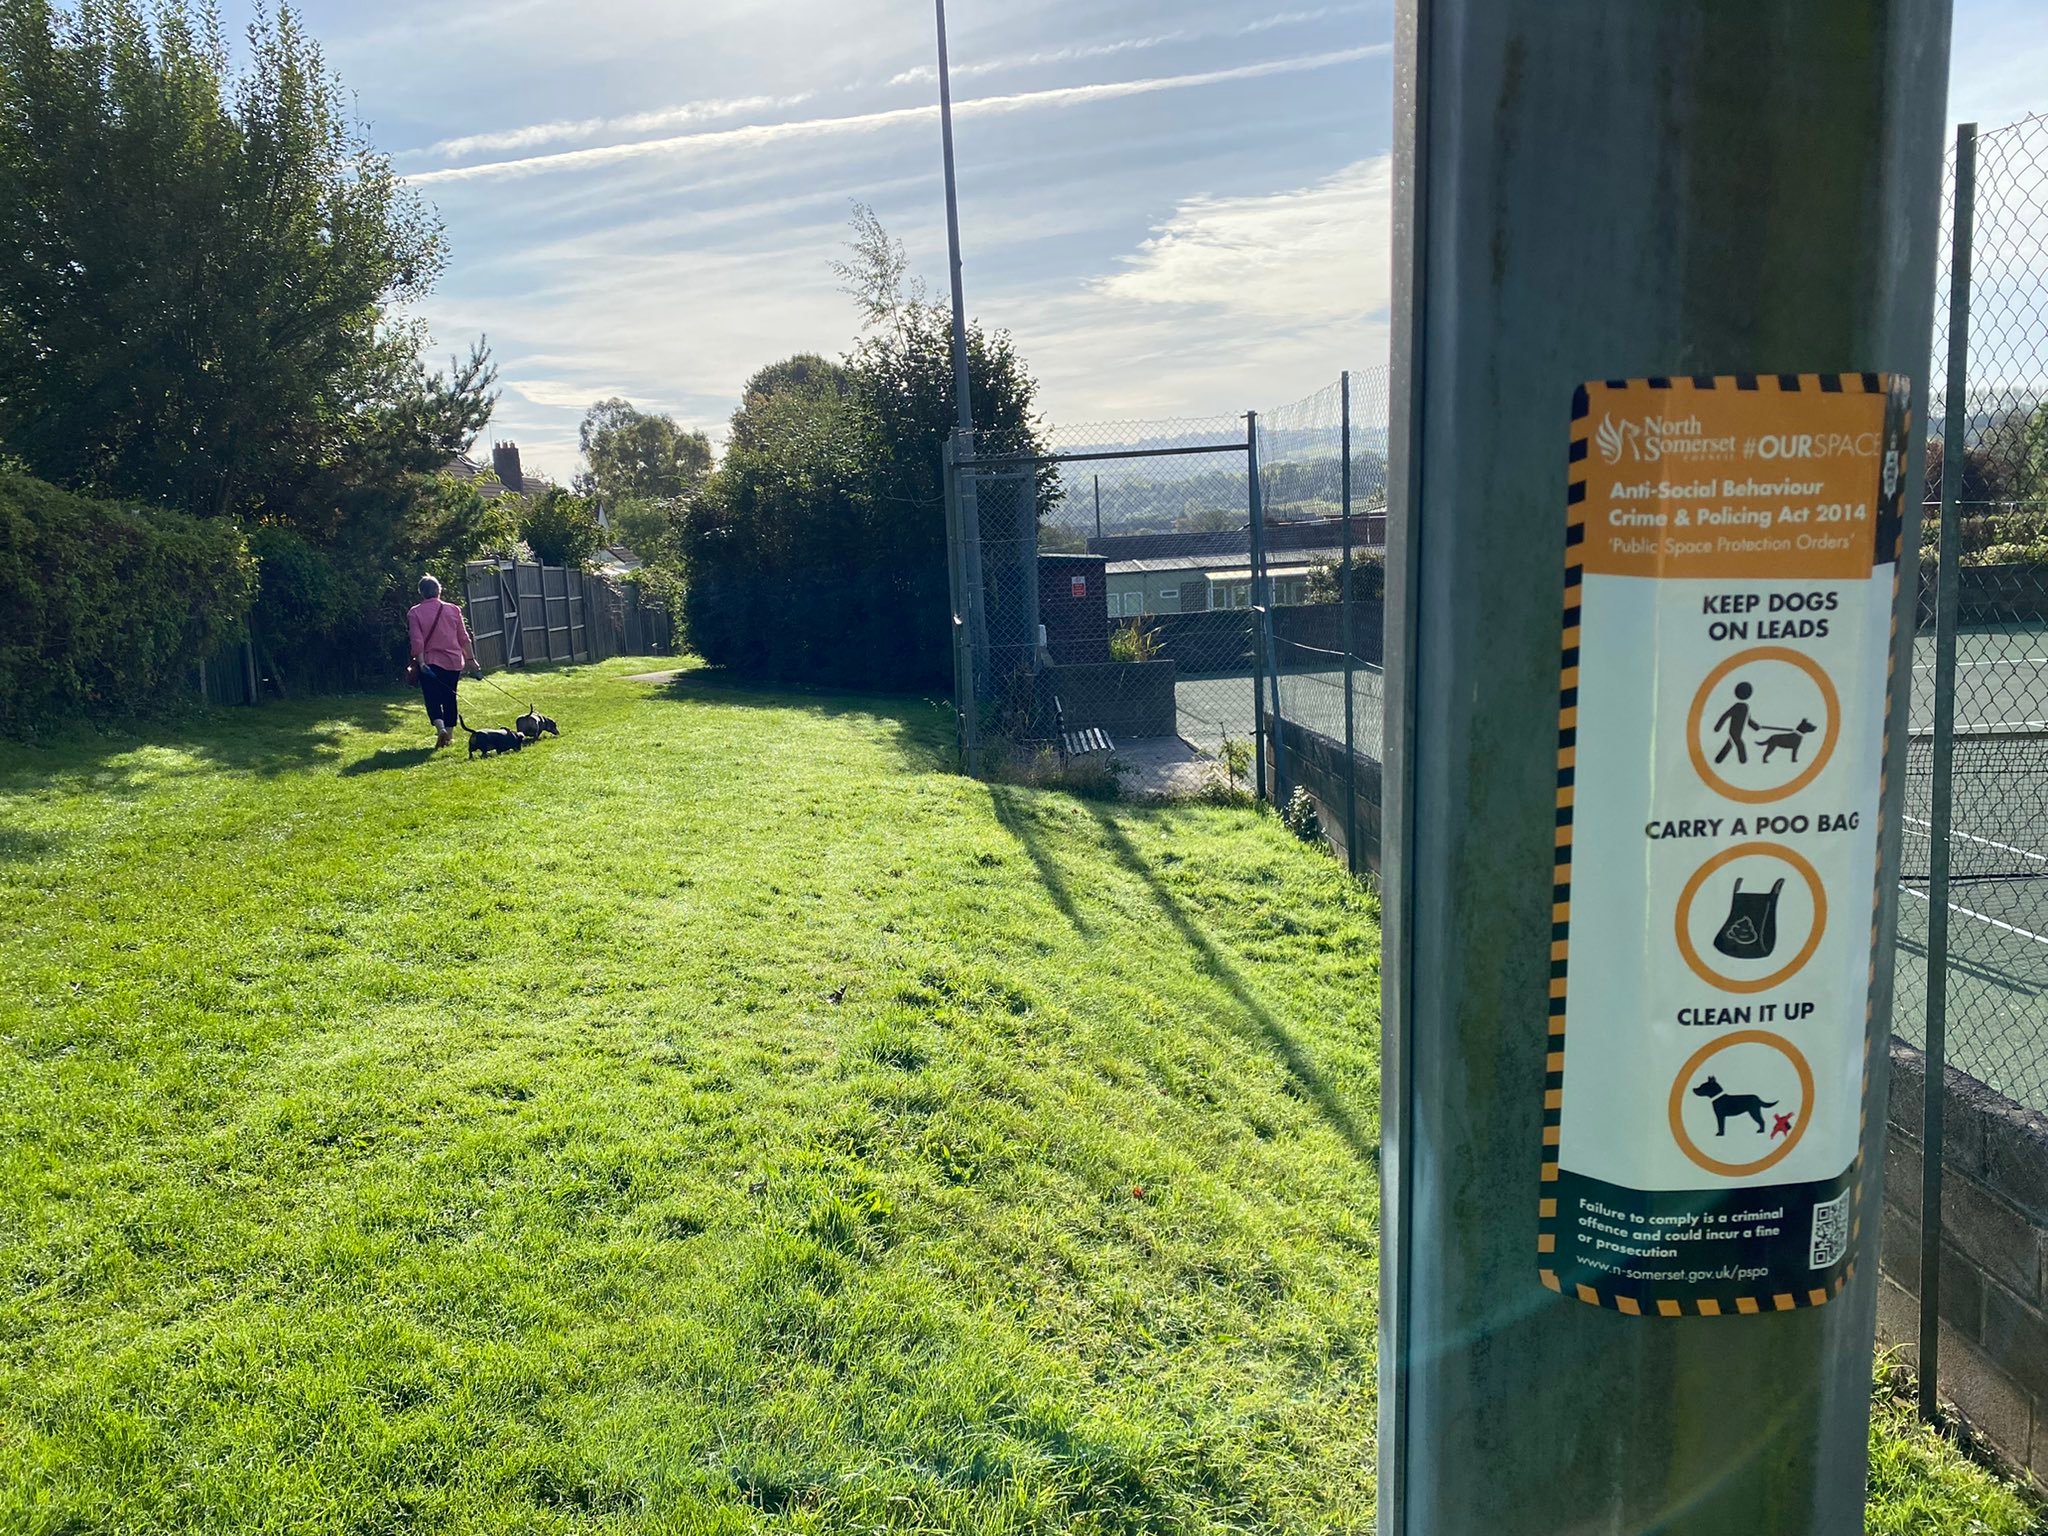 More litterbugs and irresponsible dog owners fined in North Somerset